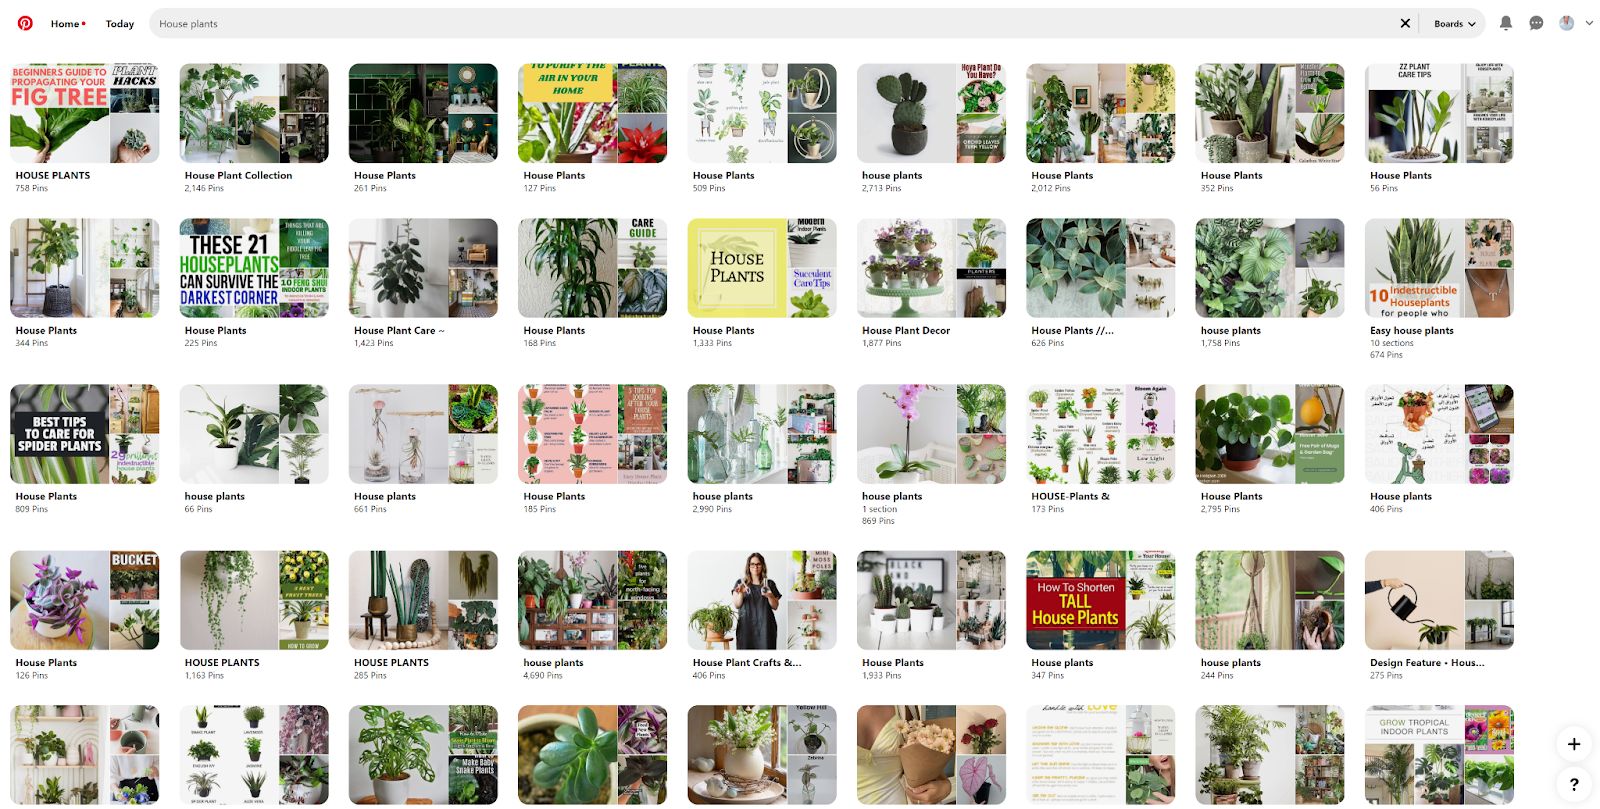 Pinterest Boards for house plants